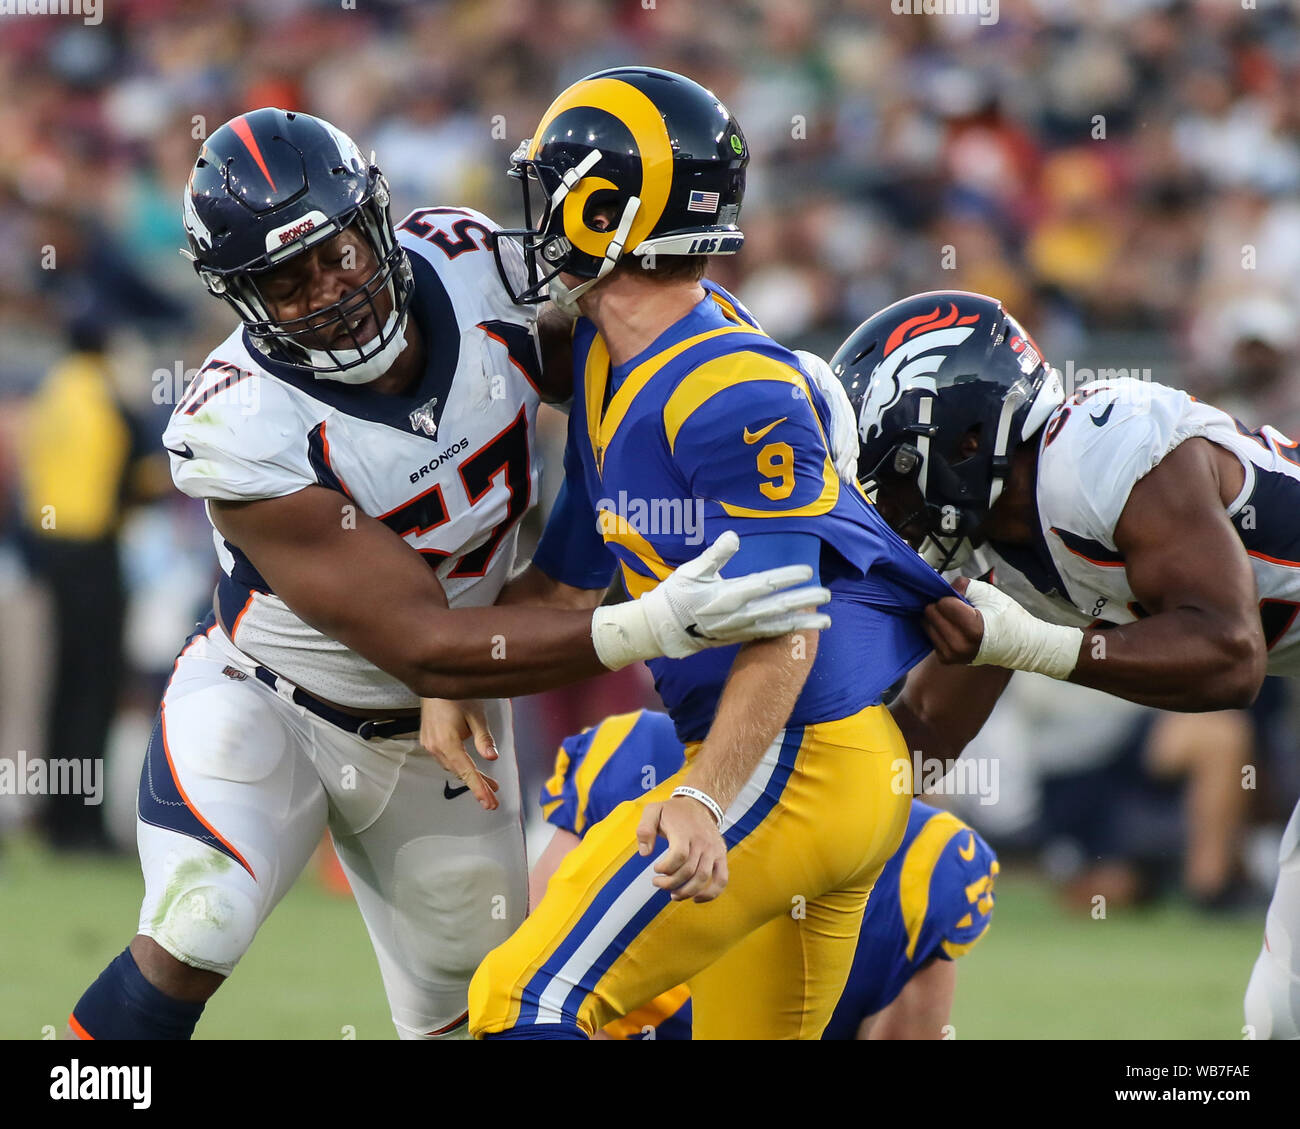 Los Angeles, CA., USA. 24th August, 2019. Denver Broncos defensive end DeMarcus Walker #57 just late to Los Angeles Rams quarterback John Wolford #9 during the NFL game between Denver Broncos vs Los Angeles Rams at the Los Angeles Memorial Coliseum in Los Angeles, Ca on August 24, 2019. Jevone Moore Credit: Cal Sport Media/Alamy Live News Stock Photo